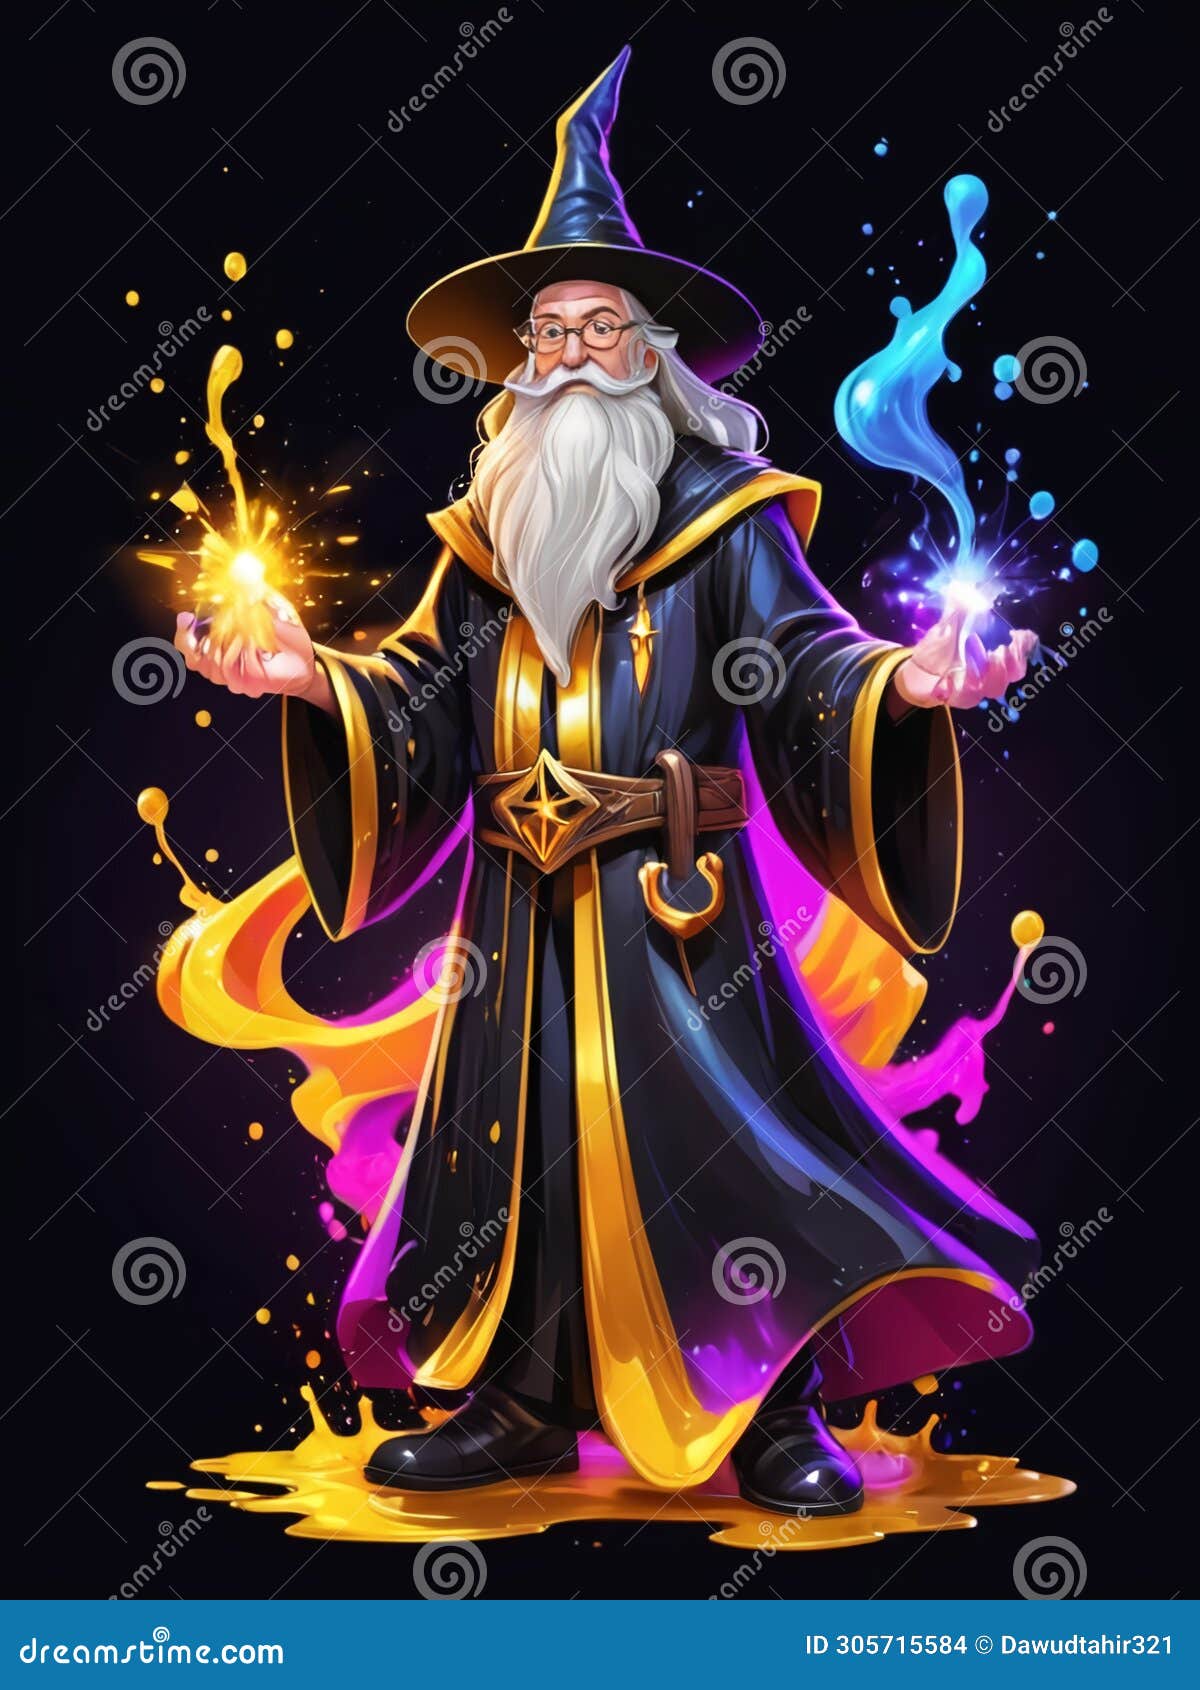 neon enchantment vibrant wizardry in cartoon splash art with bold gold and black accents